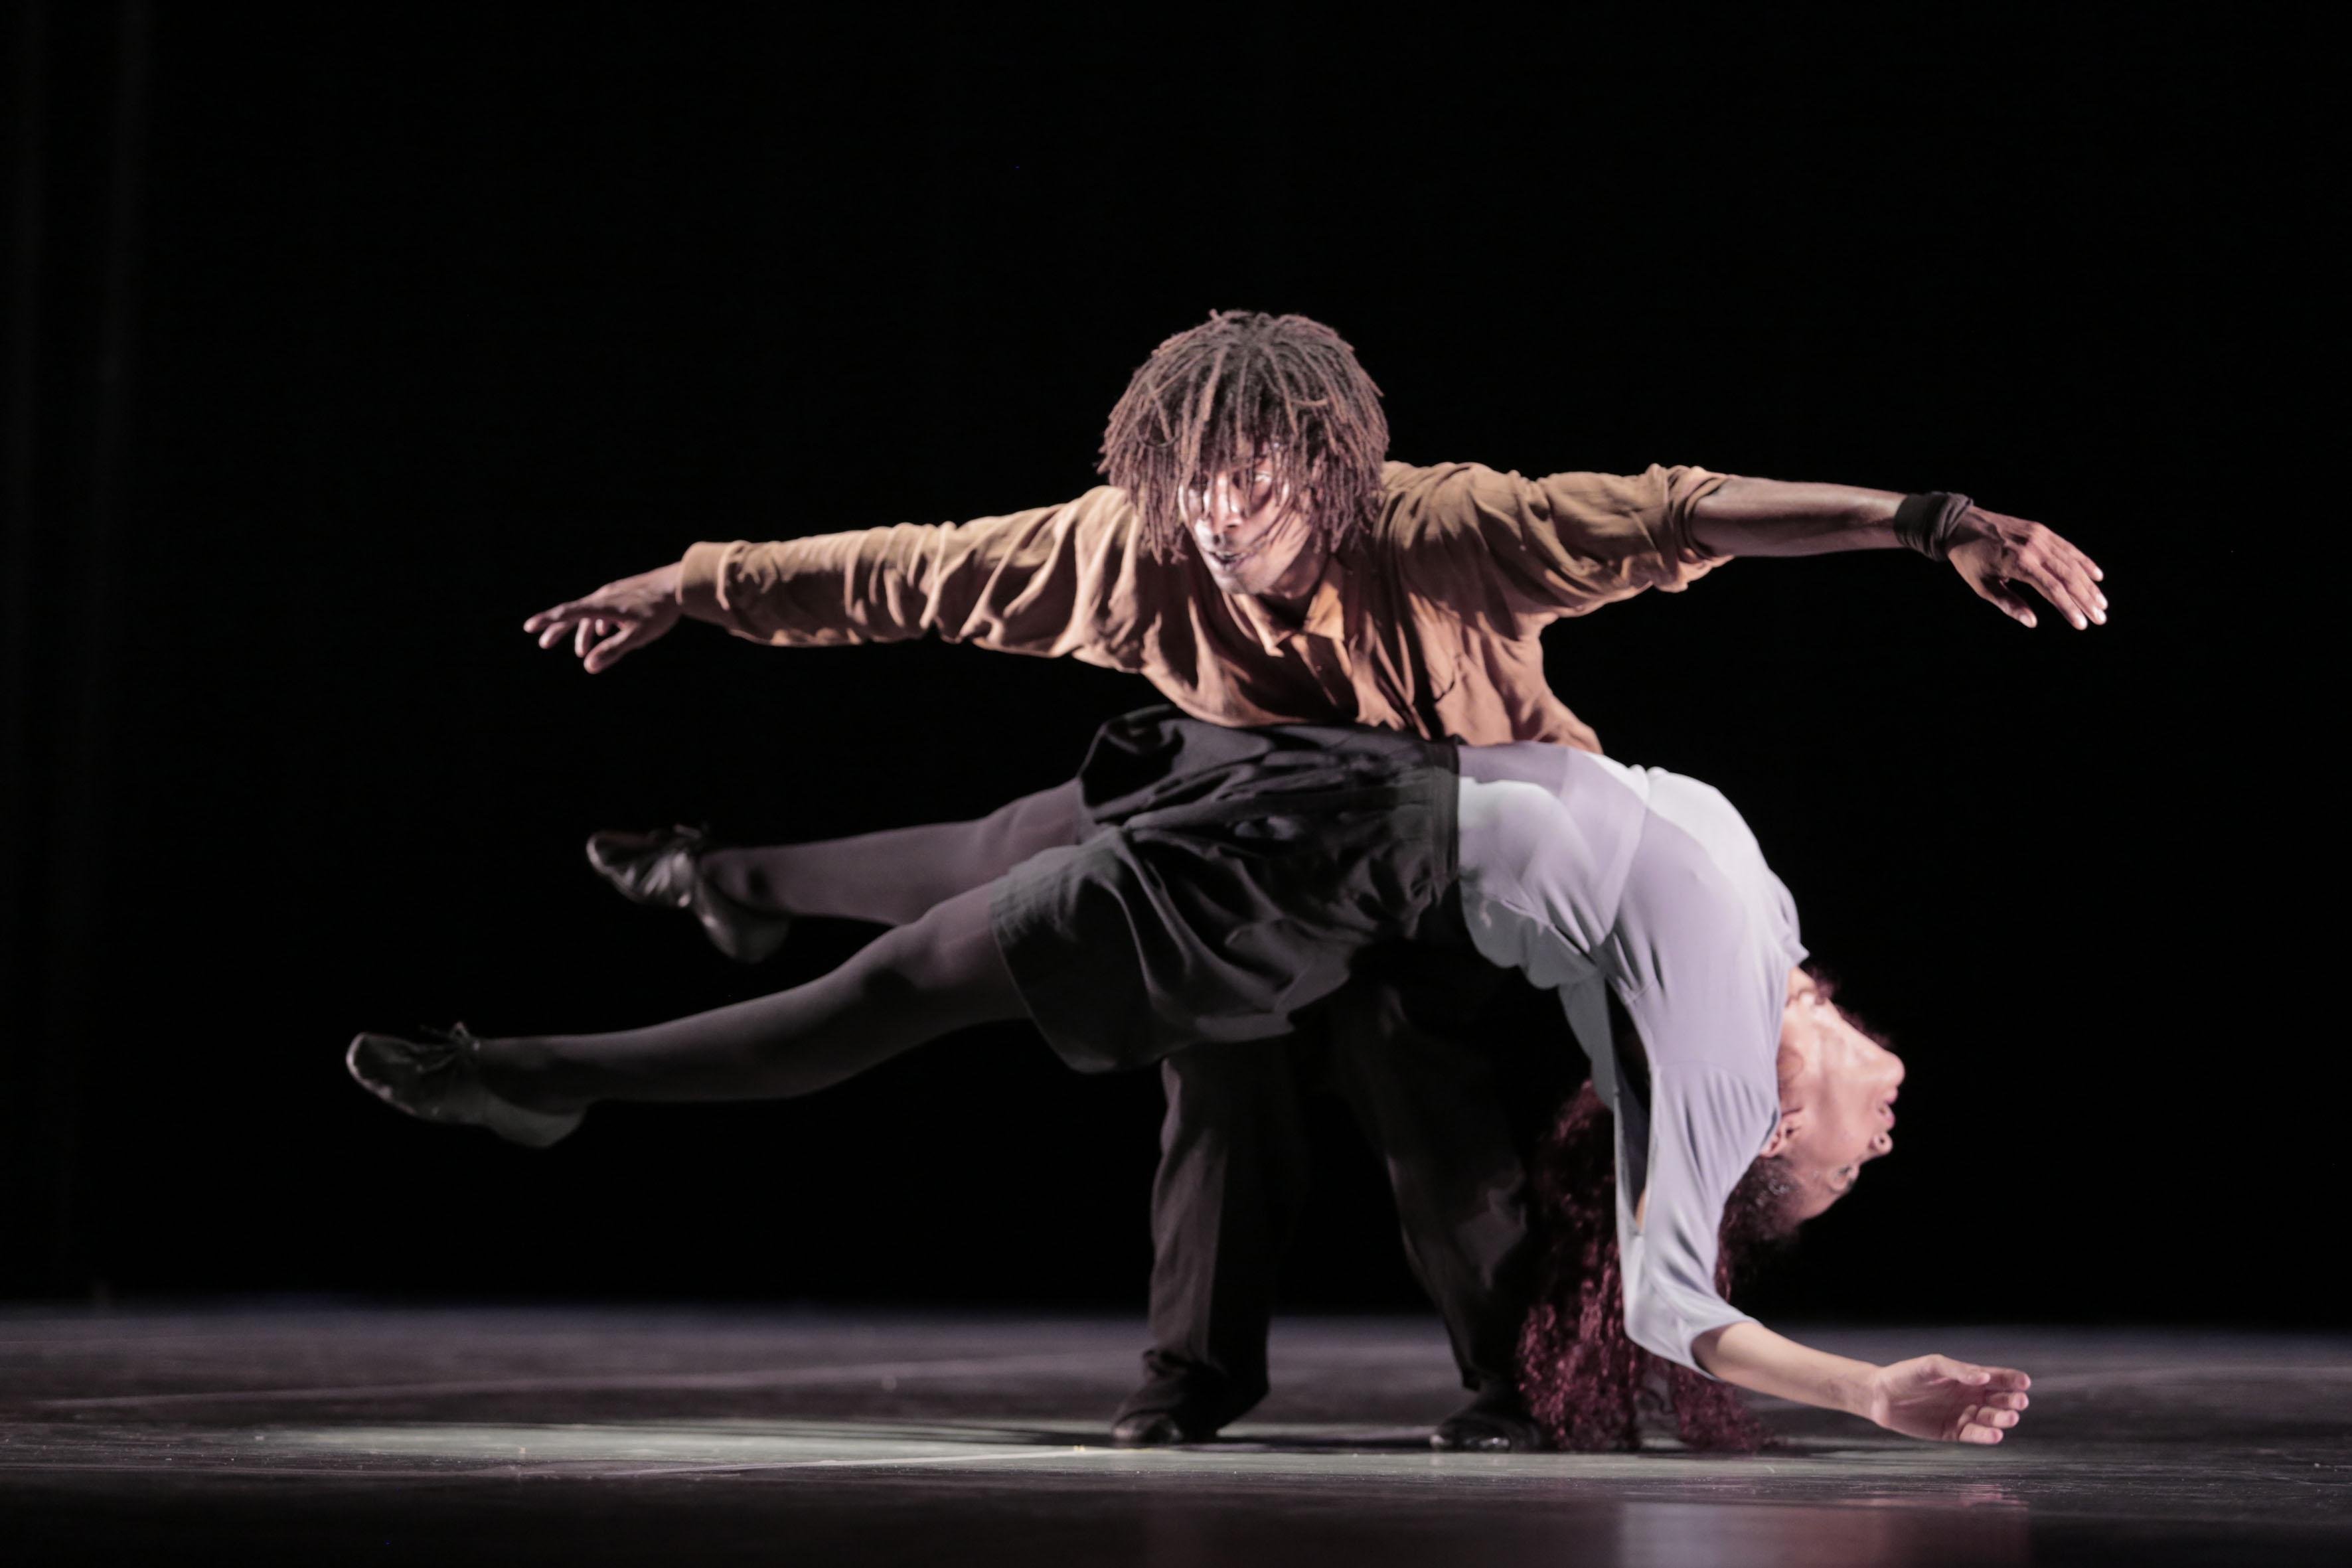  The Malpaso Dance Company performs in their Chicago debut this weekend. (Courtesy of Roberto Leon)